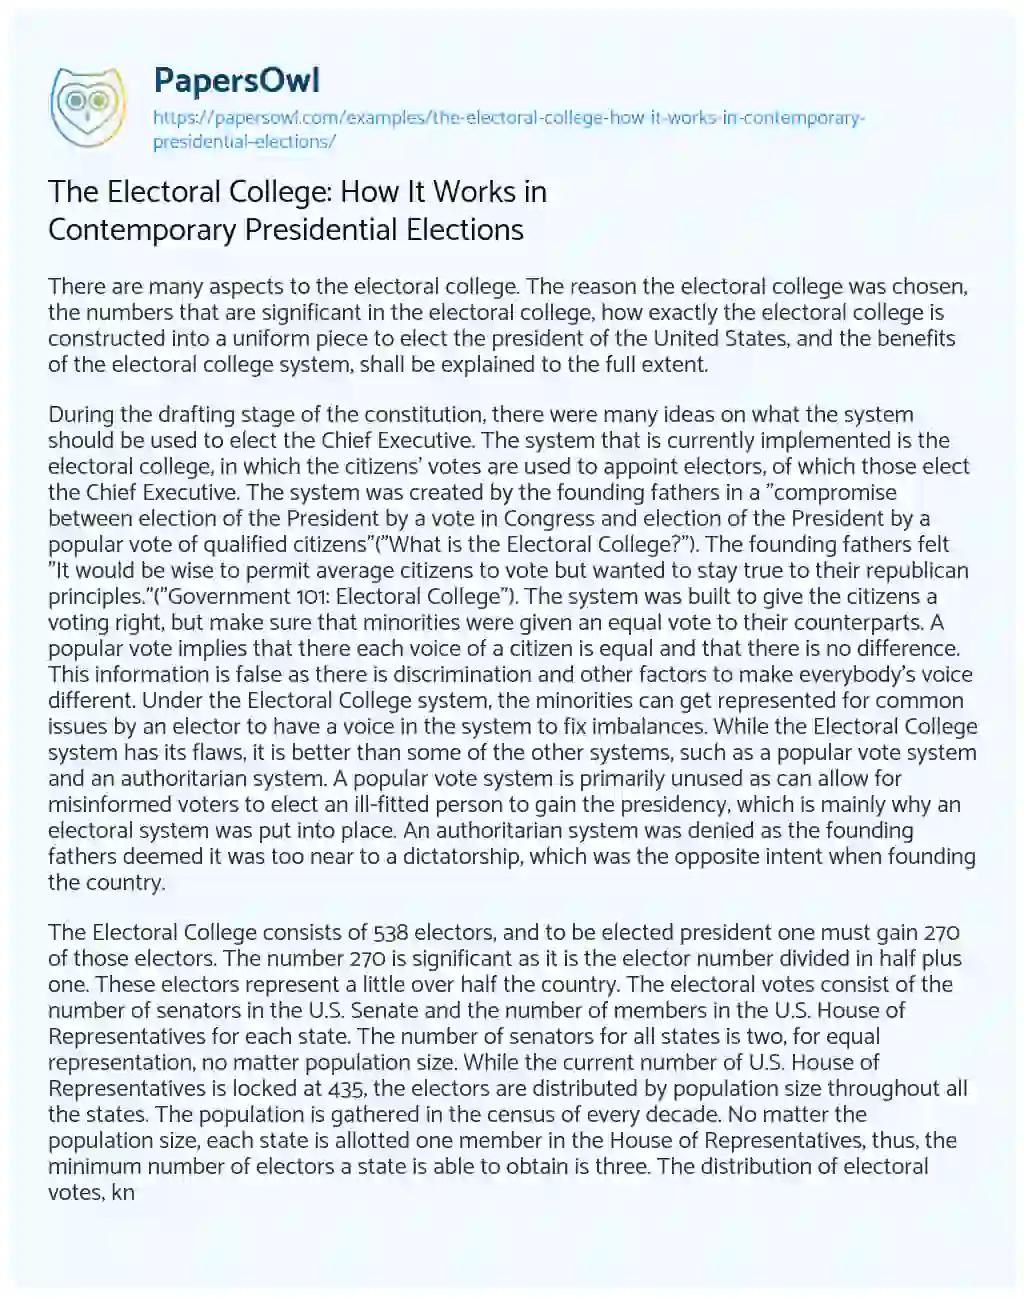 Essay on The Electoral College: how it Works in Contemporary Presidential Elections